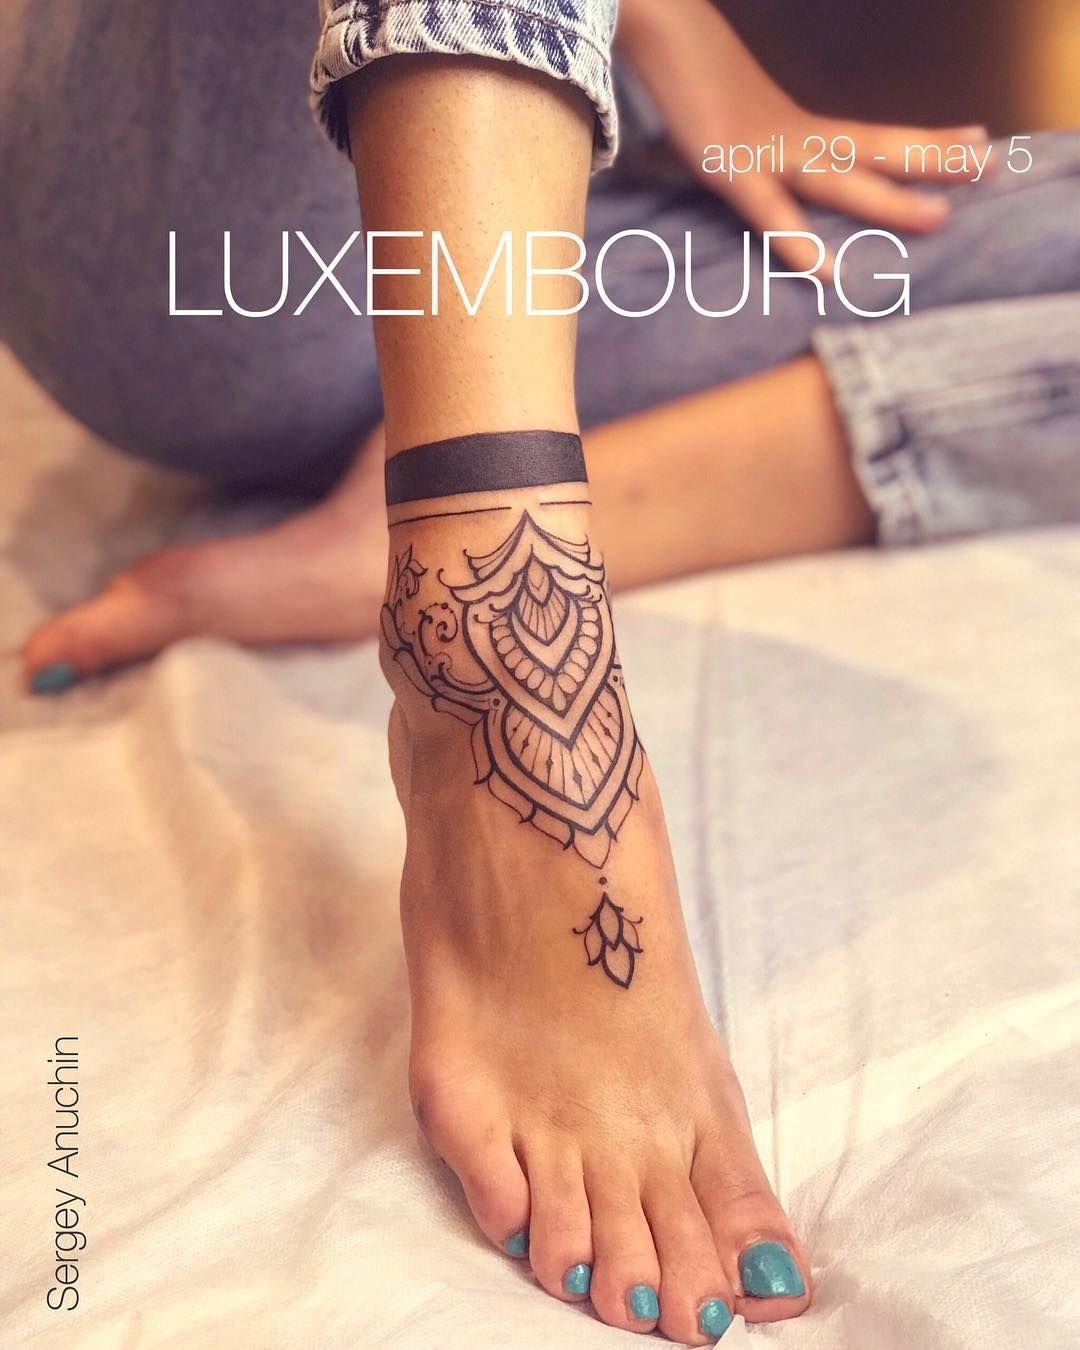 Top 20 Most Beautiful Ankle Tattoos For Women and Girls | KnowInsiders